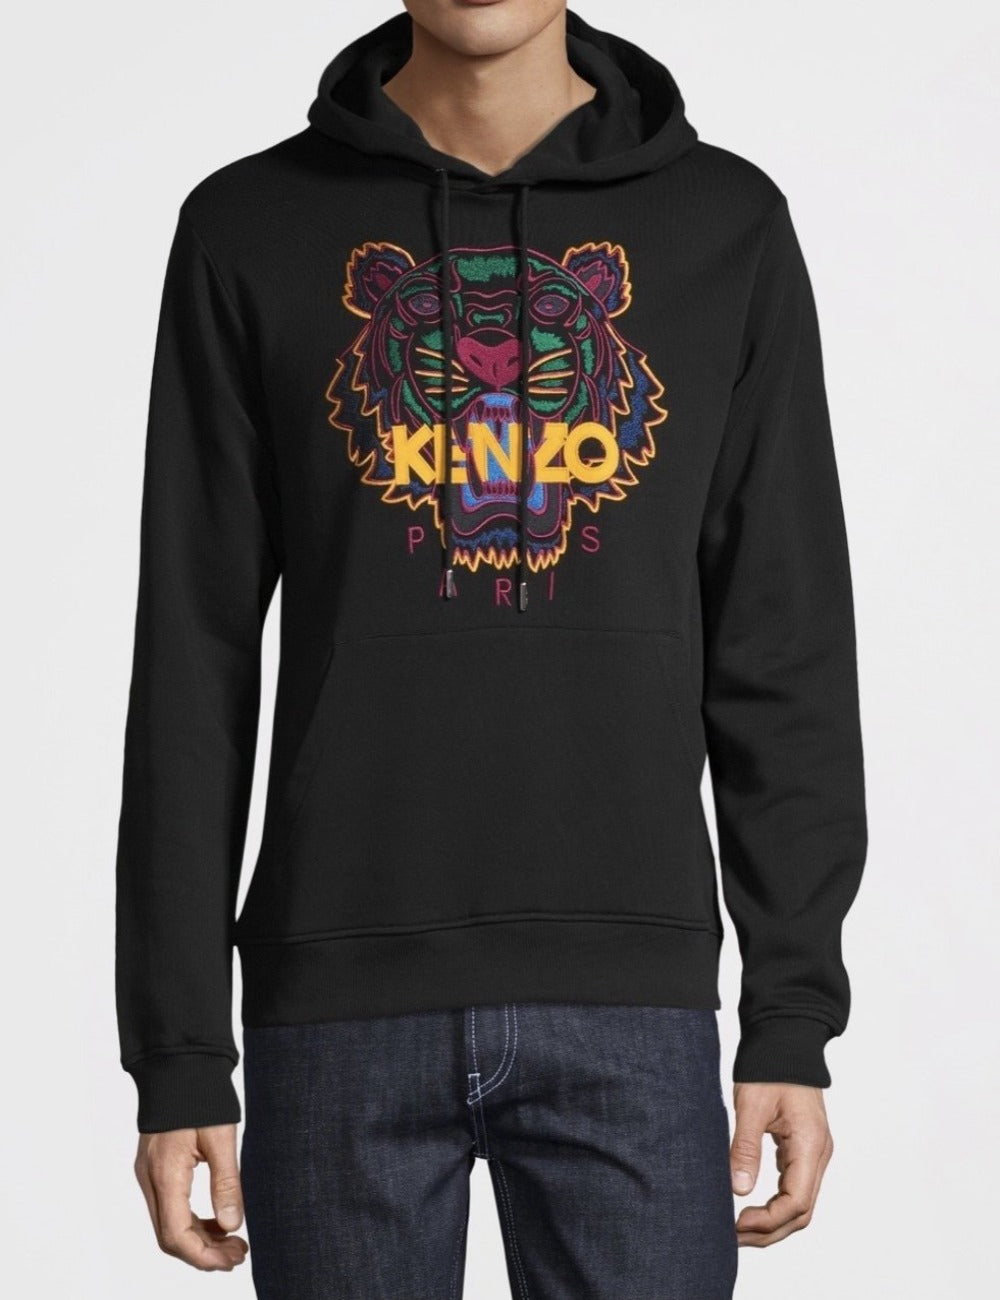 Kenzo Tiger Hoodie - Shop Streetwear, Sneakers, Slippers and Gifts online | Malaysia - The Factory KL